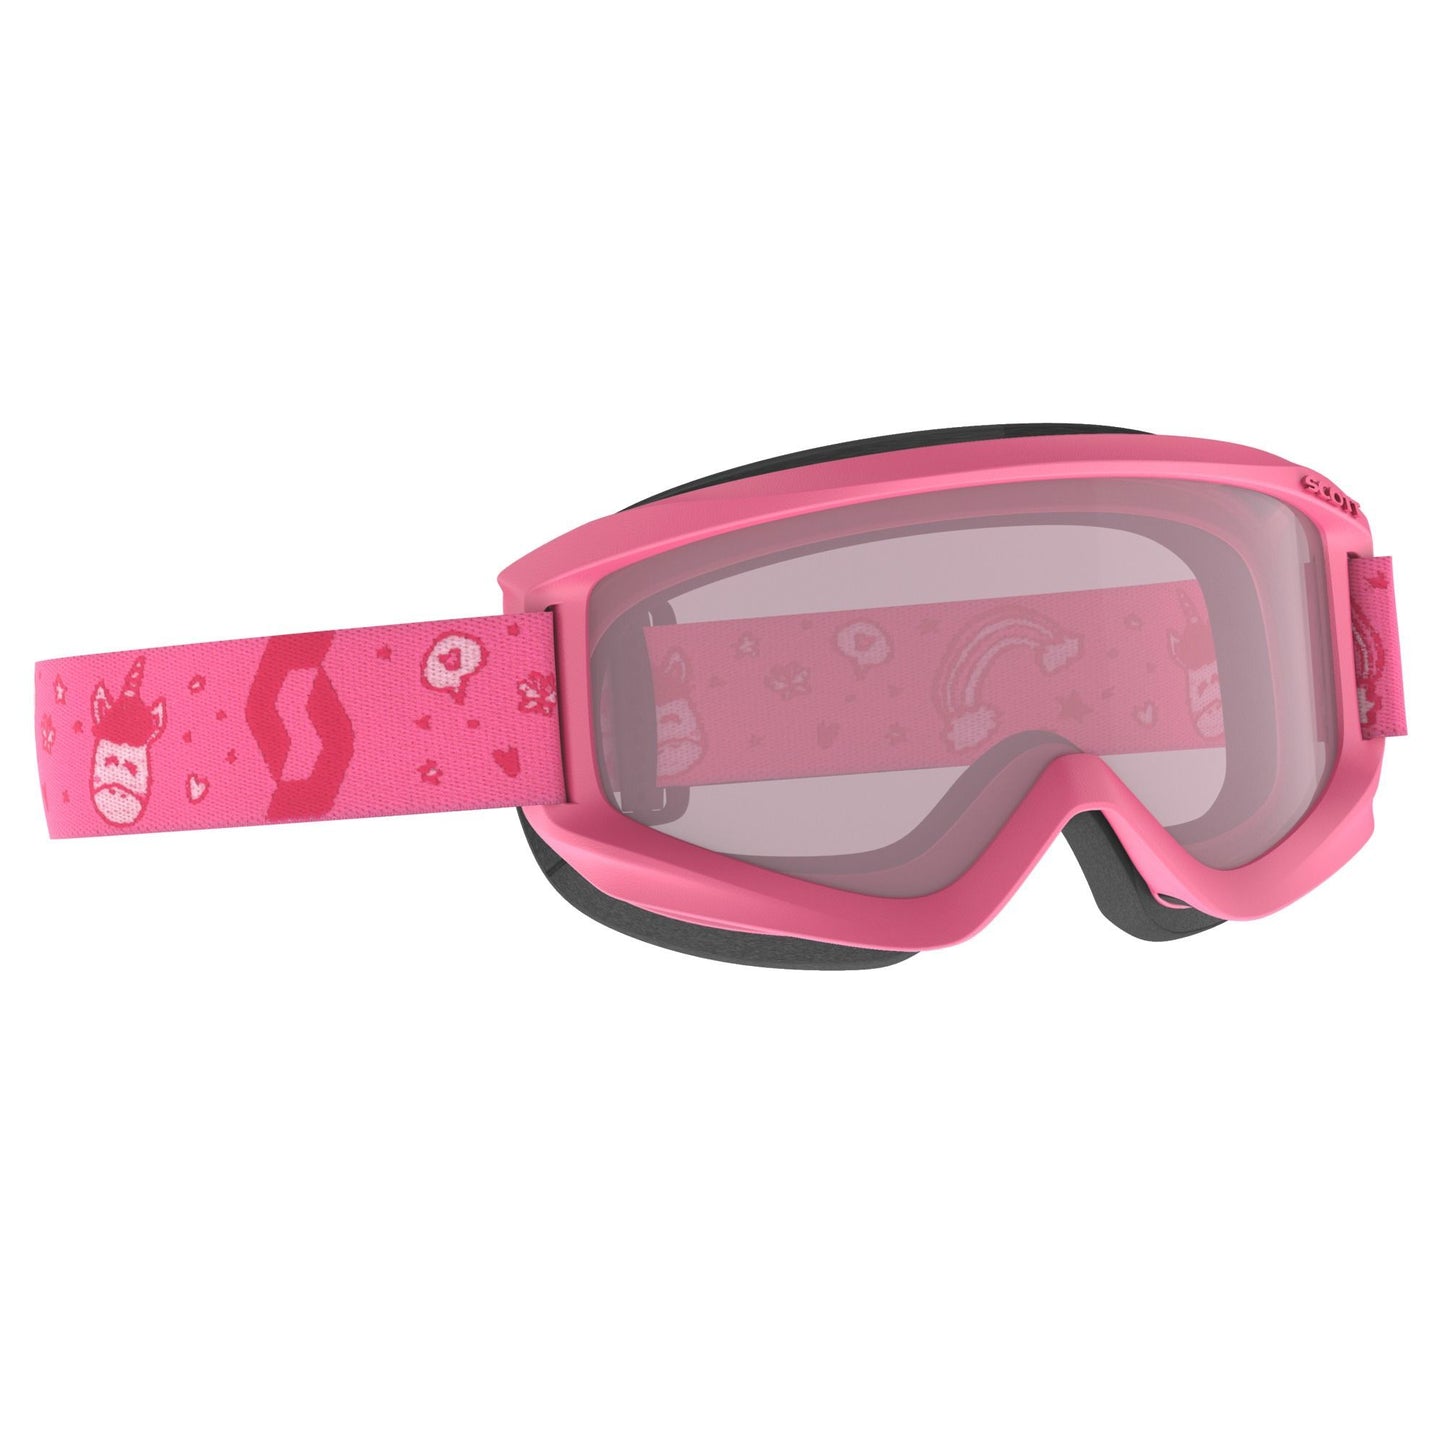 Scott Youth Jr Agent Snow Goggle Pink/White / Enhancer Snow Goggles